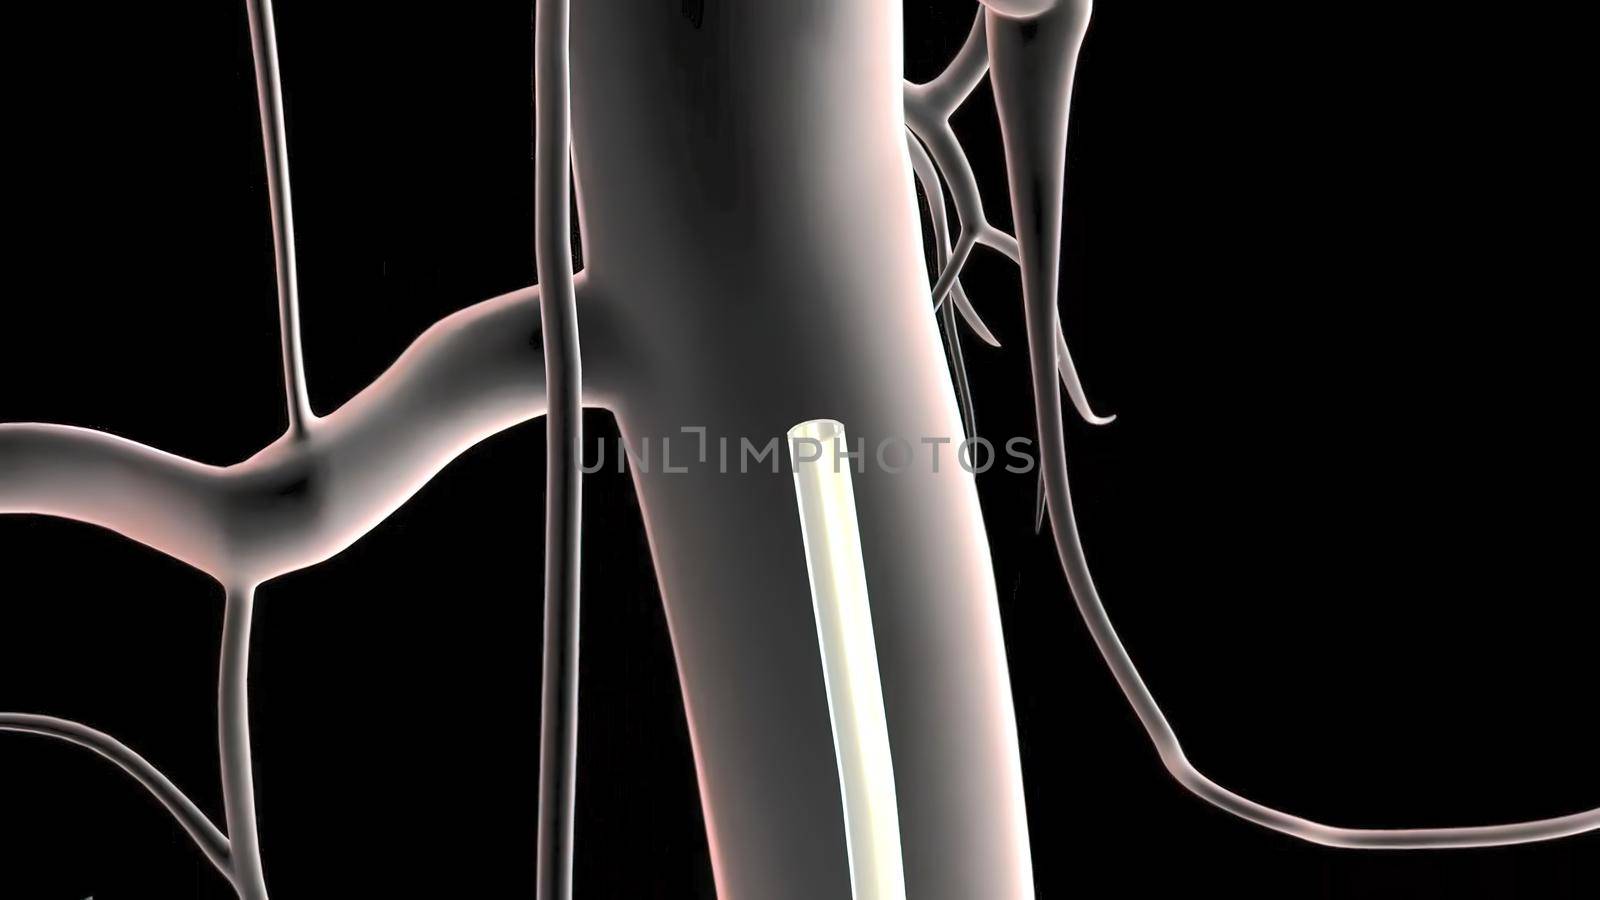 An abdominal aortic aneurysm occurs when a lower portion of the body's main artery (aorta) becomes weakened and bulges